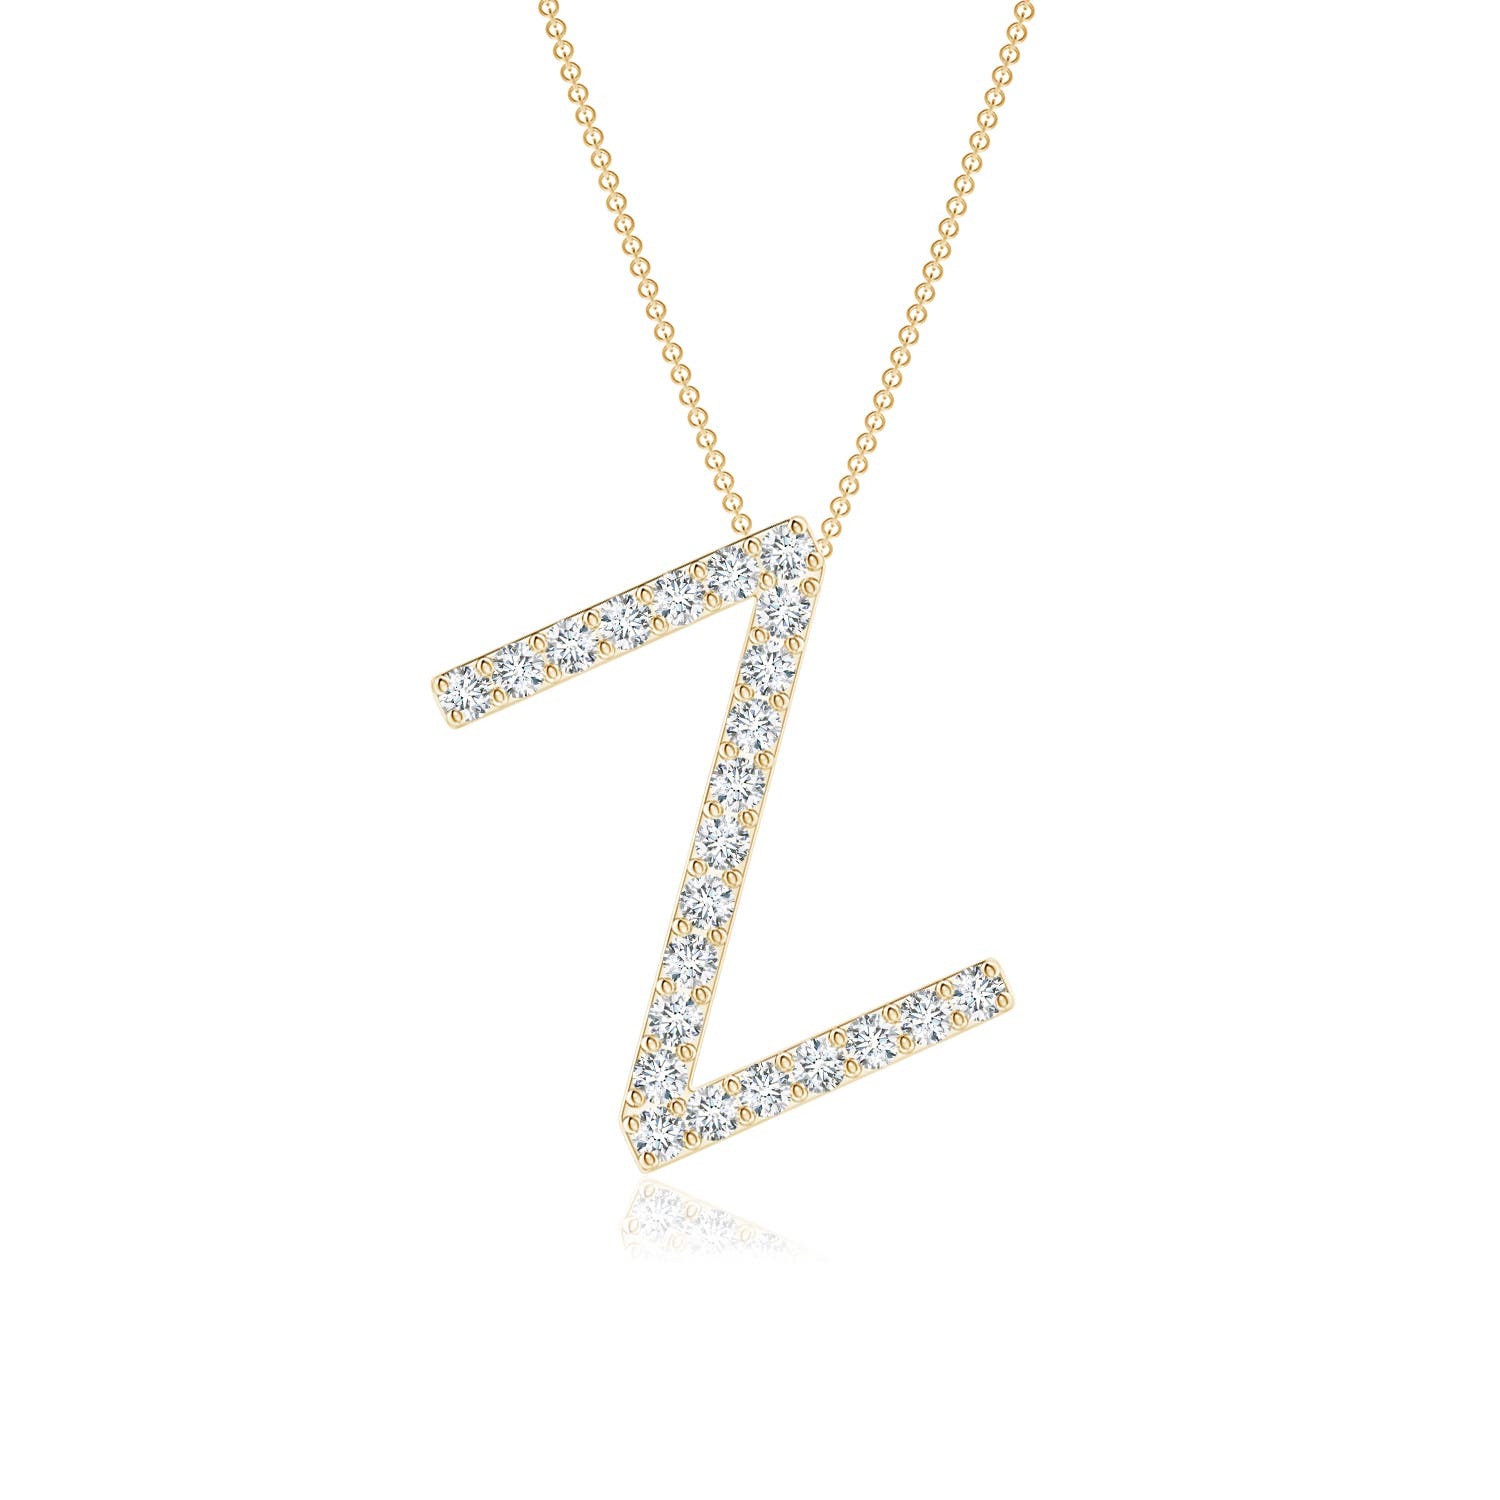 Primary image for ANGARA Lab-Grown 0.18Ct Diamond Capital "Z" Initial Pendant Necklace in 14K Gold